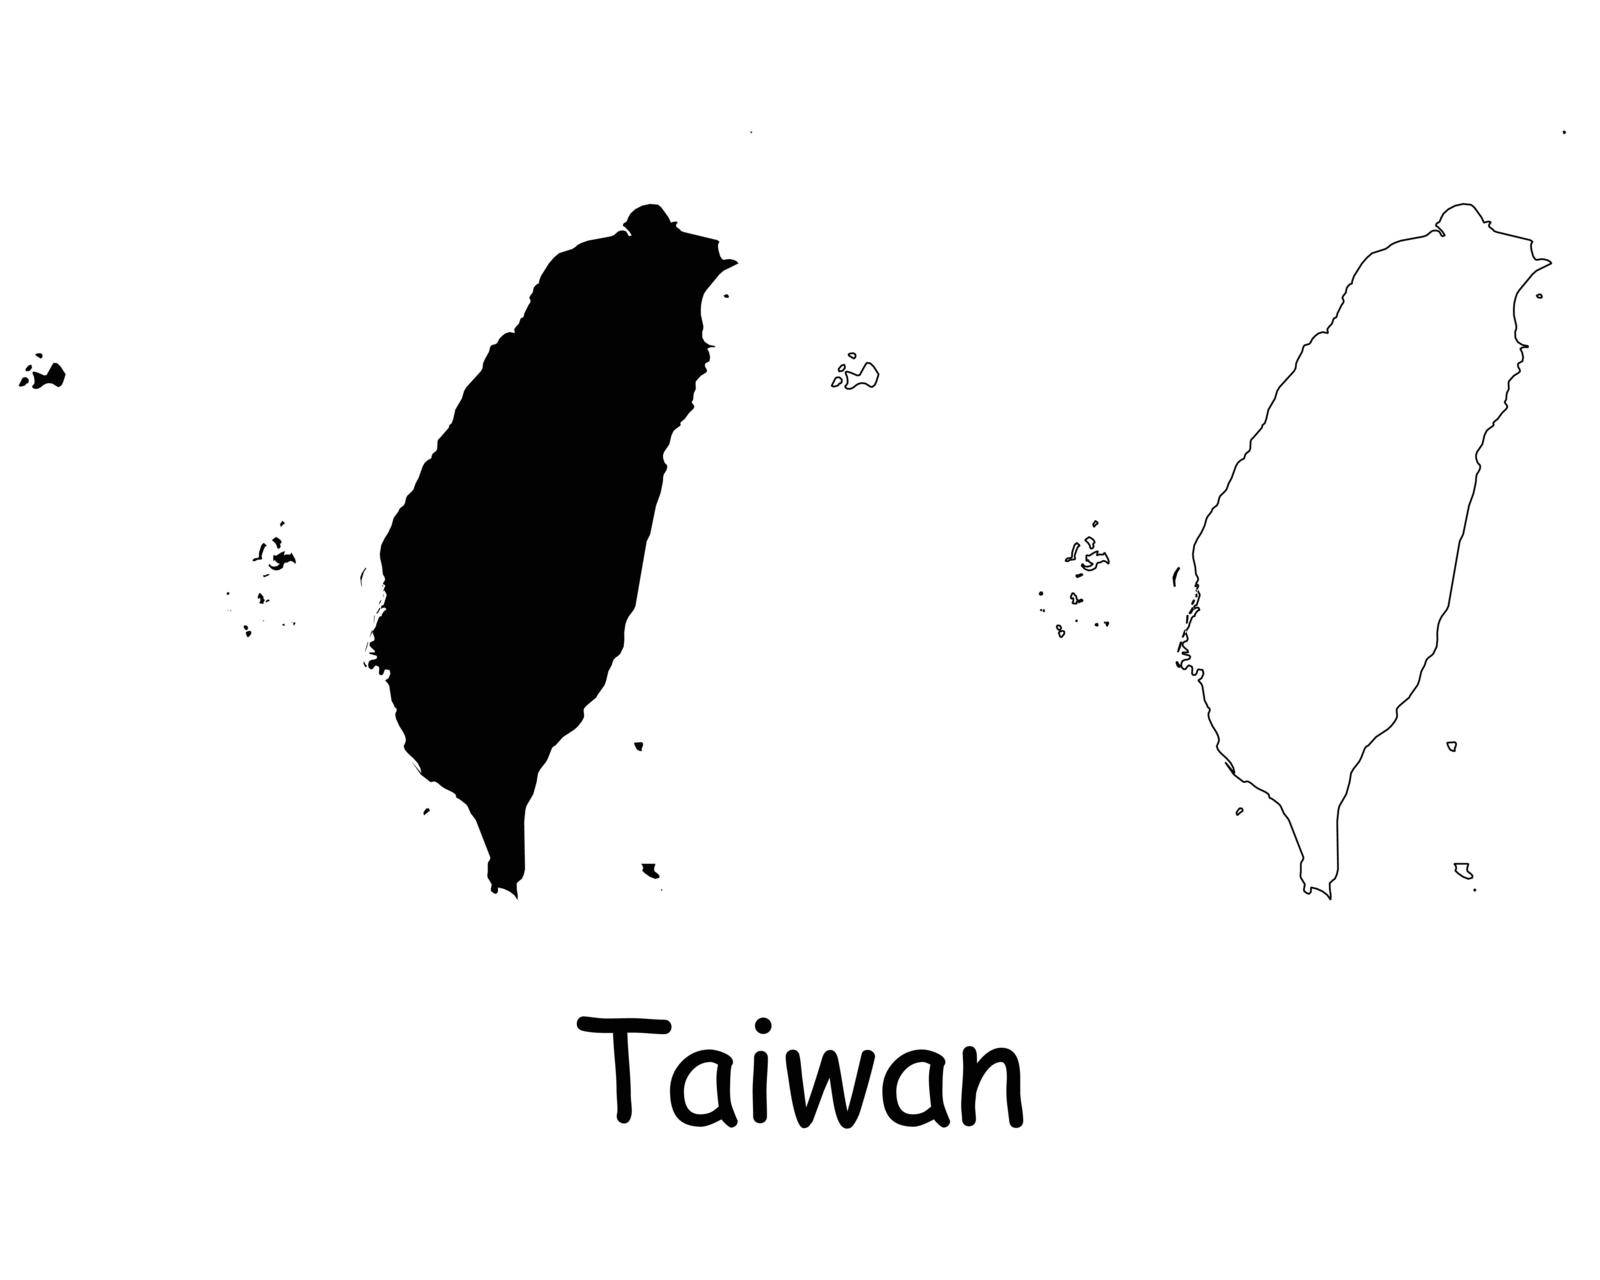 Taiwan Map. Taiwanese Black silhouette and outline map isolated on white background. Republic of China Territory Border Boundary Line Icon Sign Symbol Clipart EPS Vector